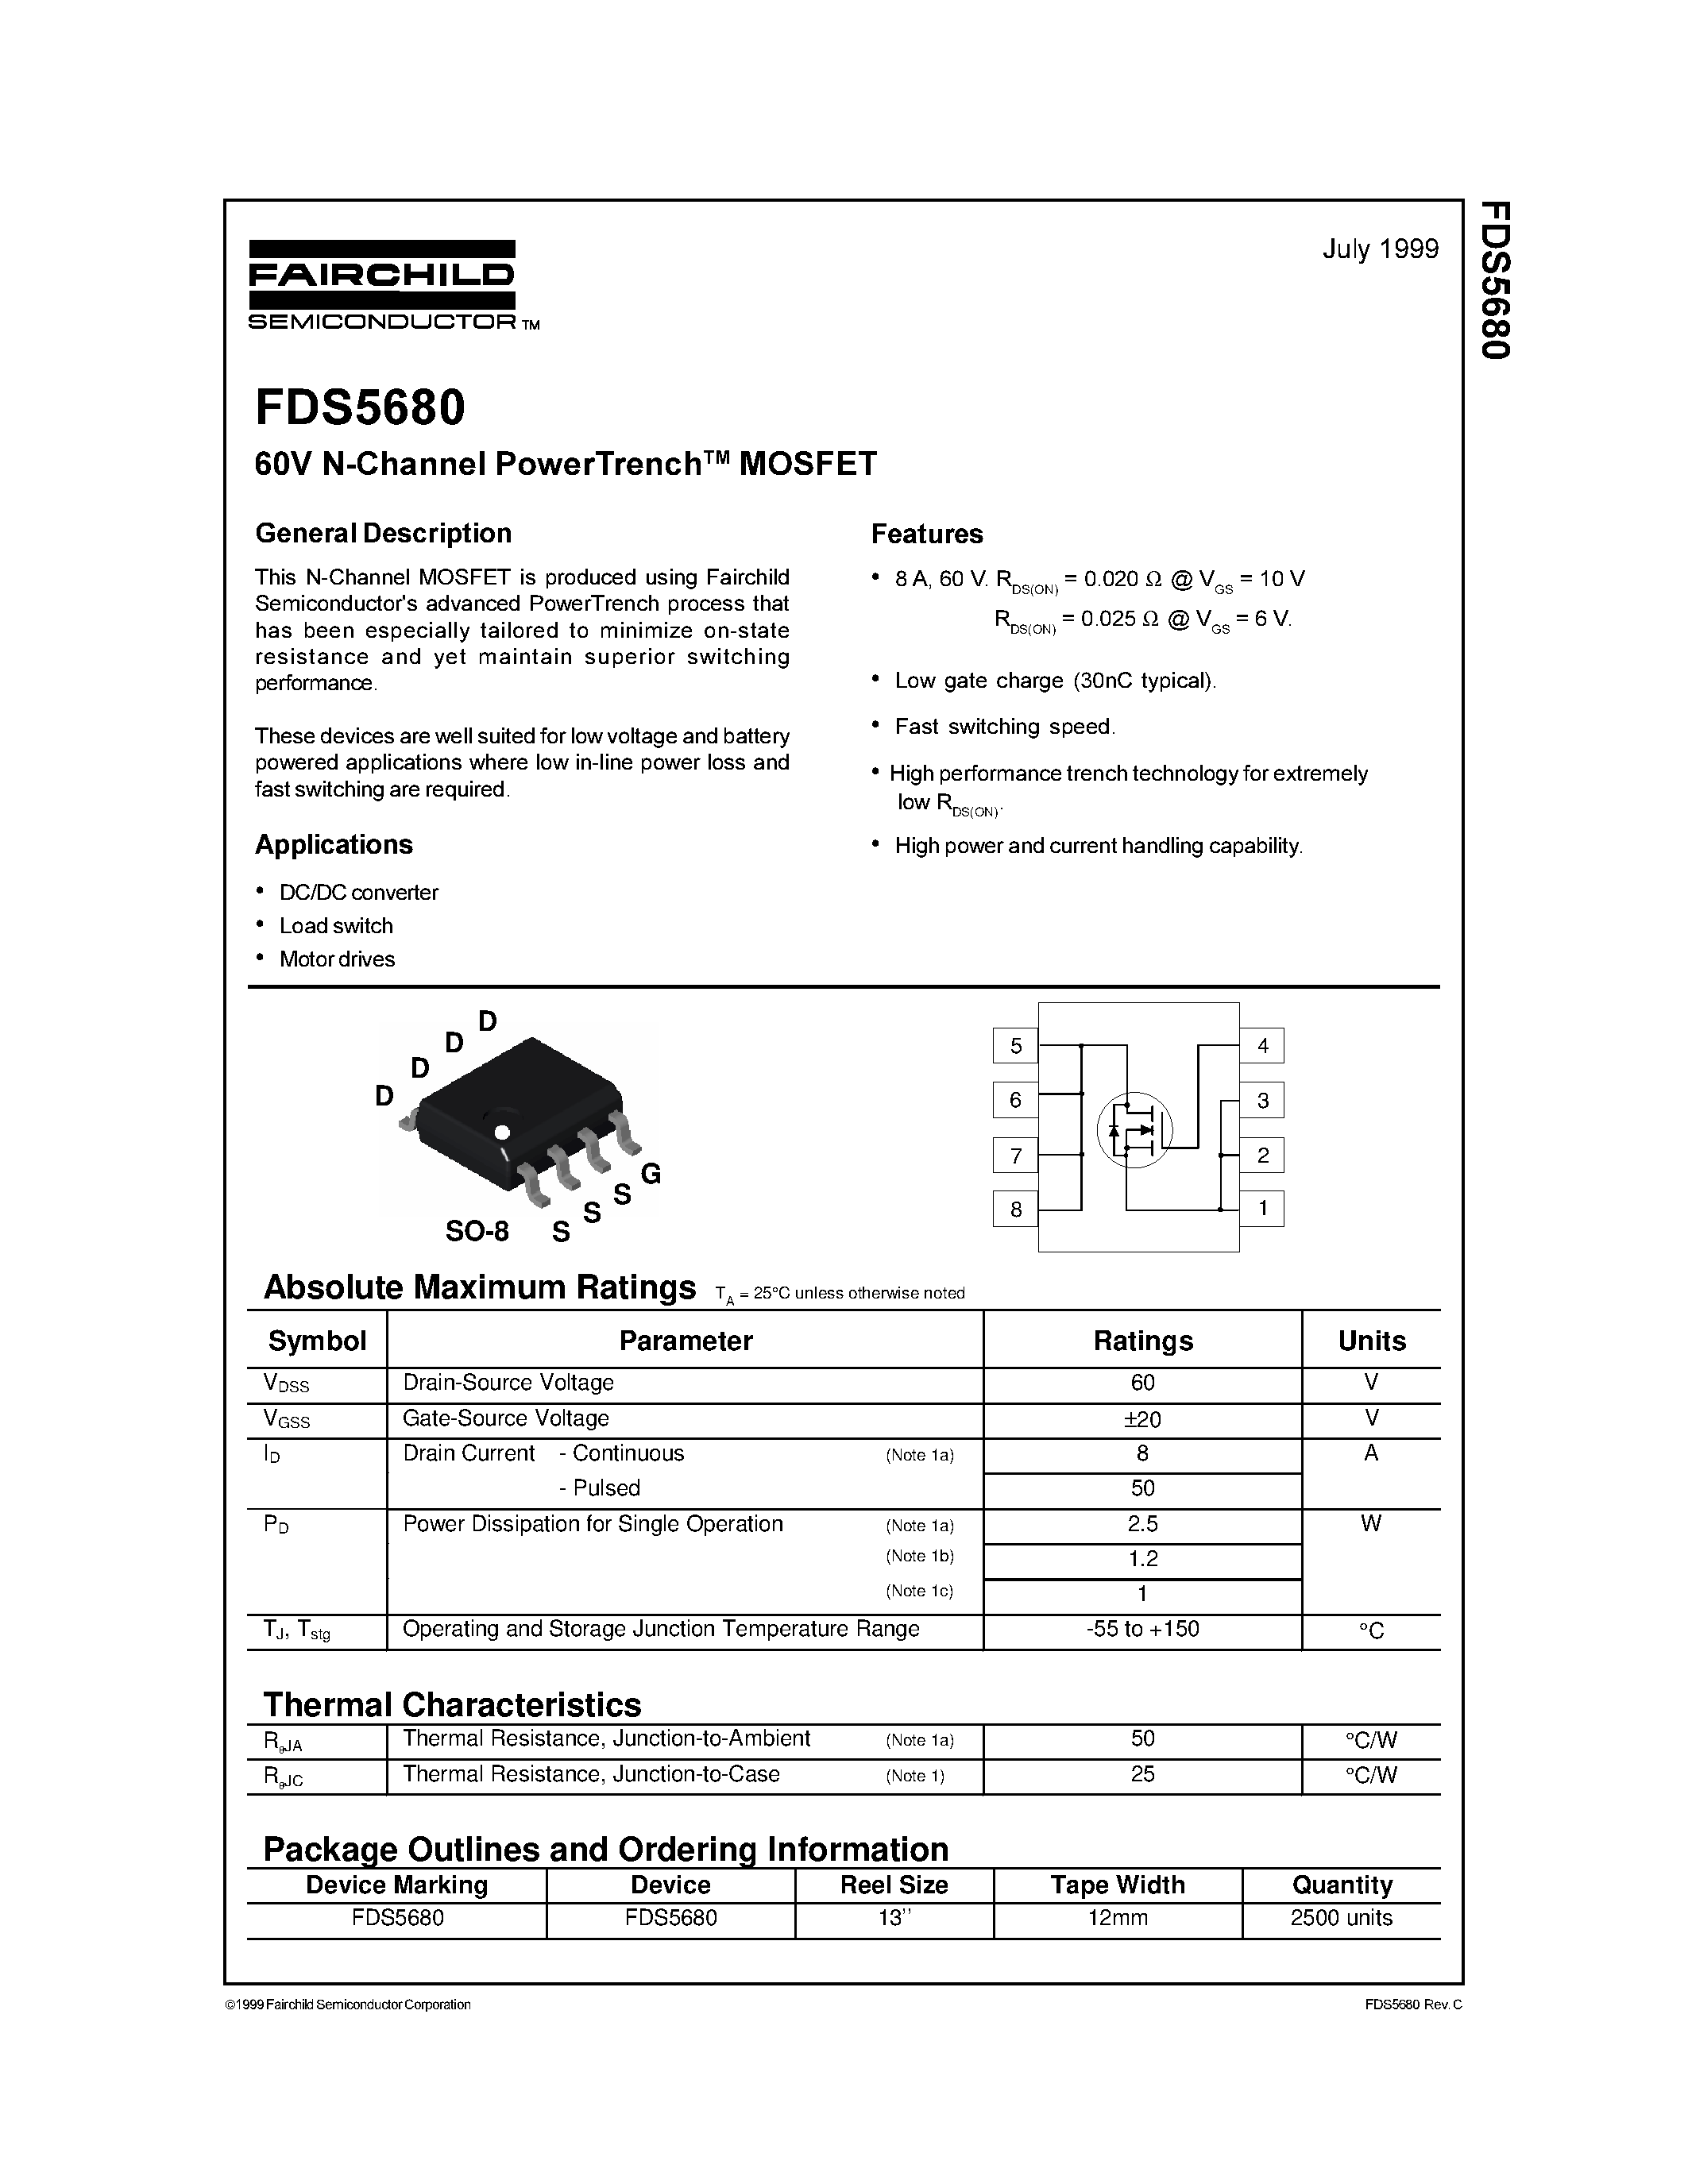 Даташит FDS5680 - 60V N-Channel PowerTrench MOSFET страница 1